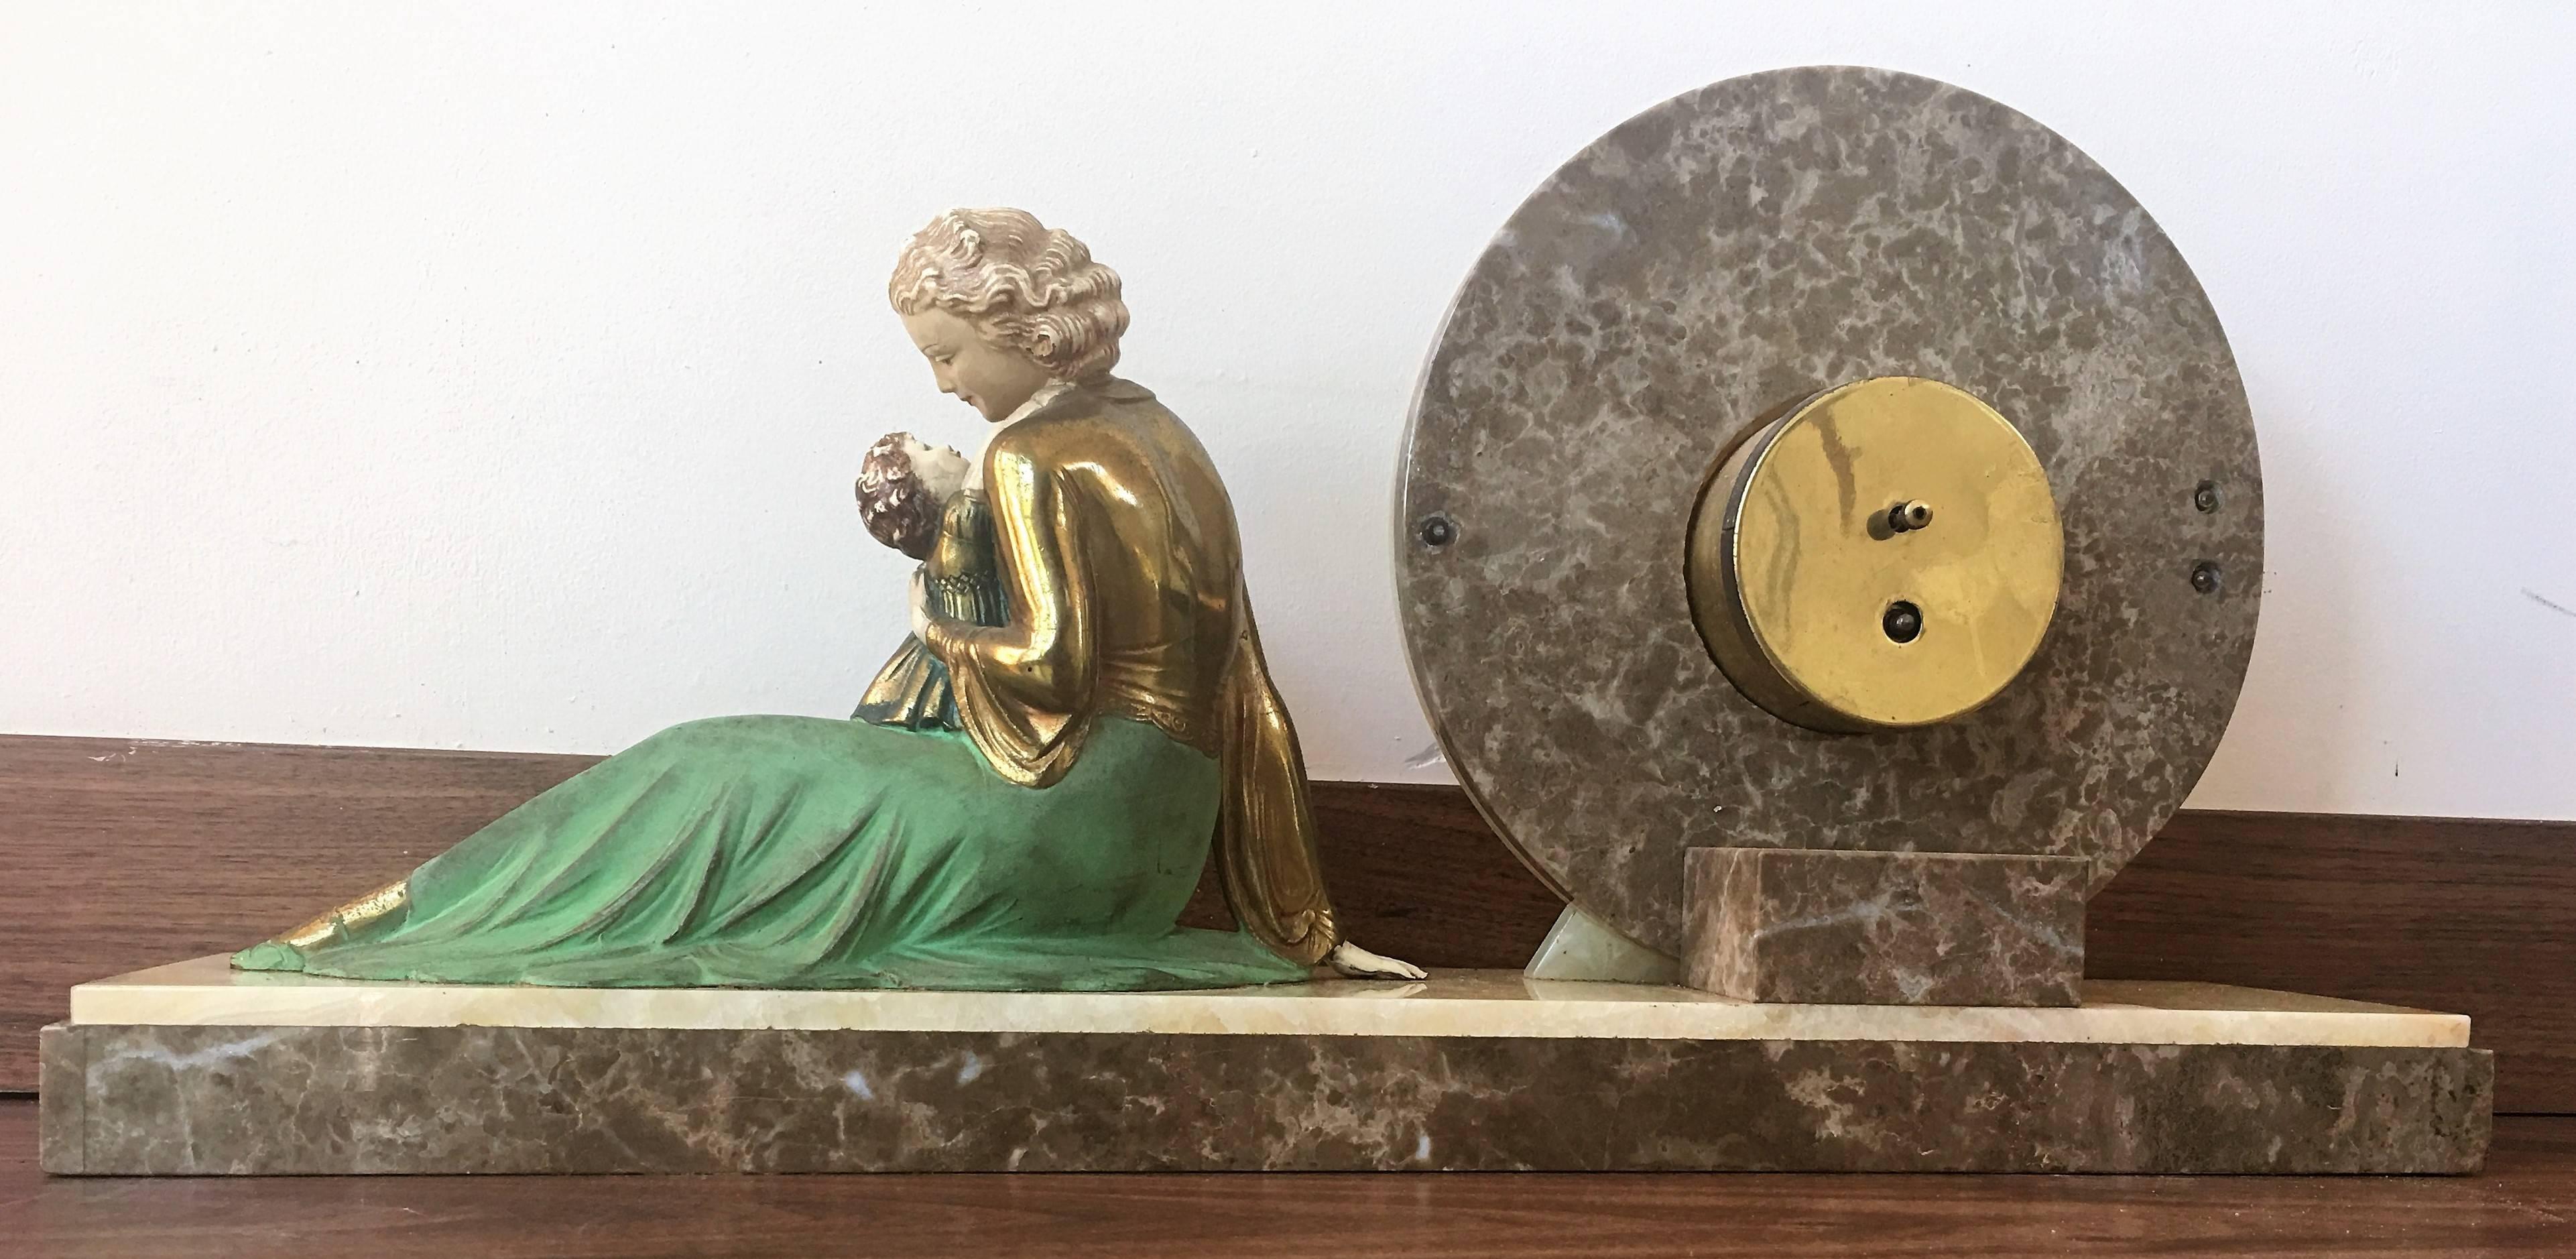 French Art Deco Clock with Figurine, circa 1920 Signed by J.Roggia, France